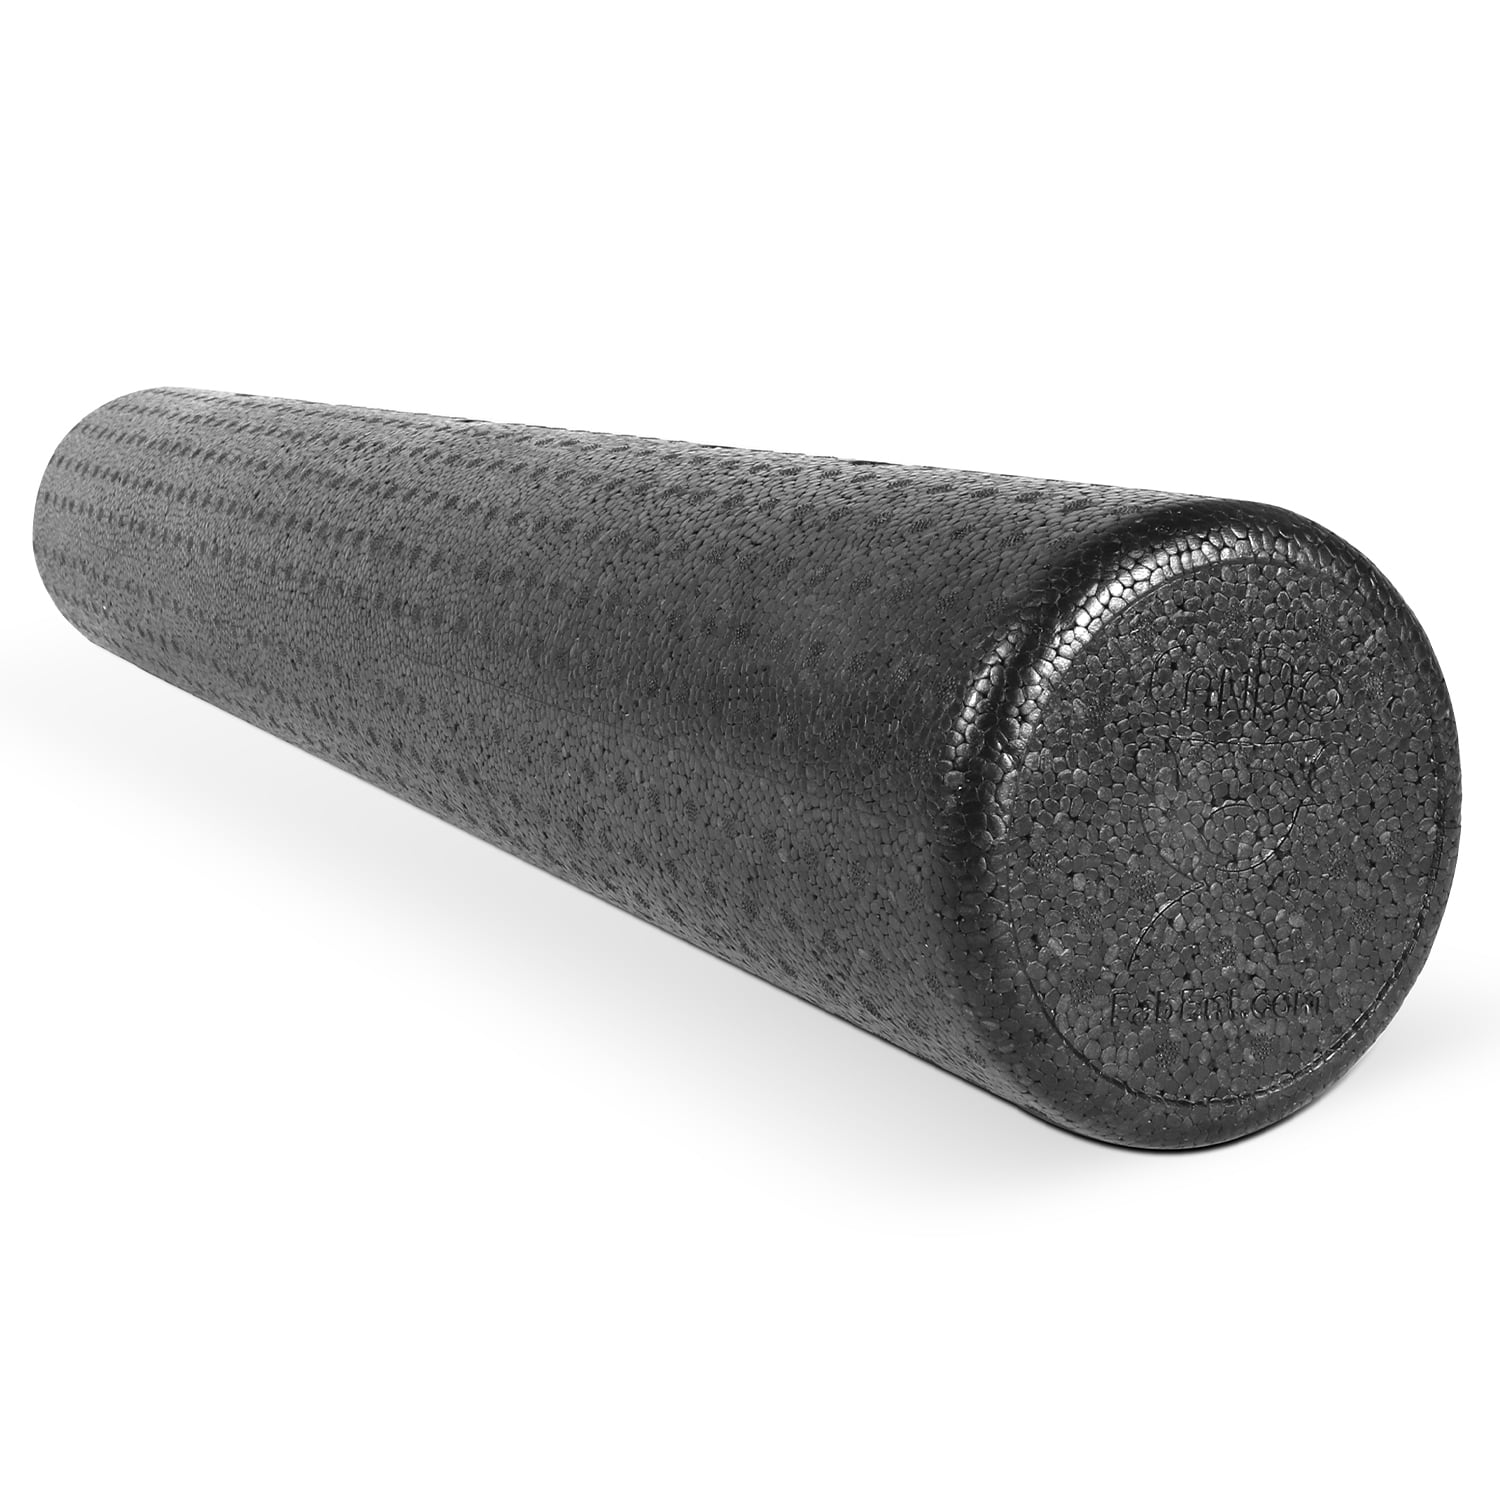 Foam Roller 36 High Density Exercise Massage Yoga Back Pain Therapy 6x36 Inches 